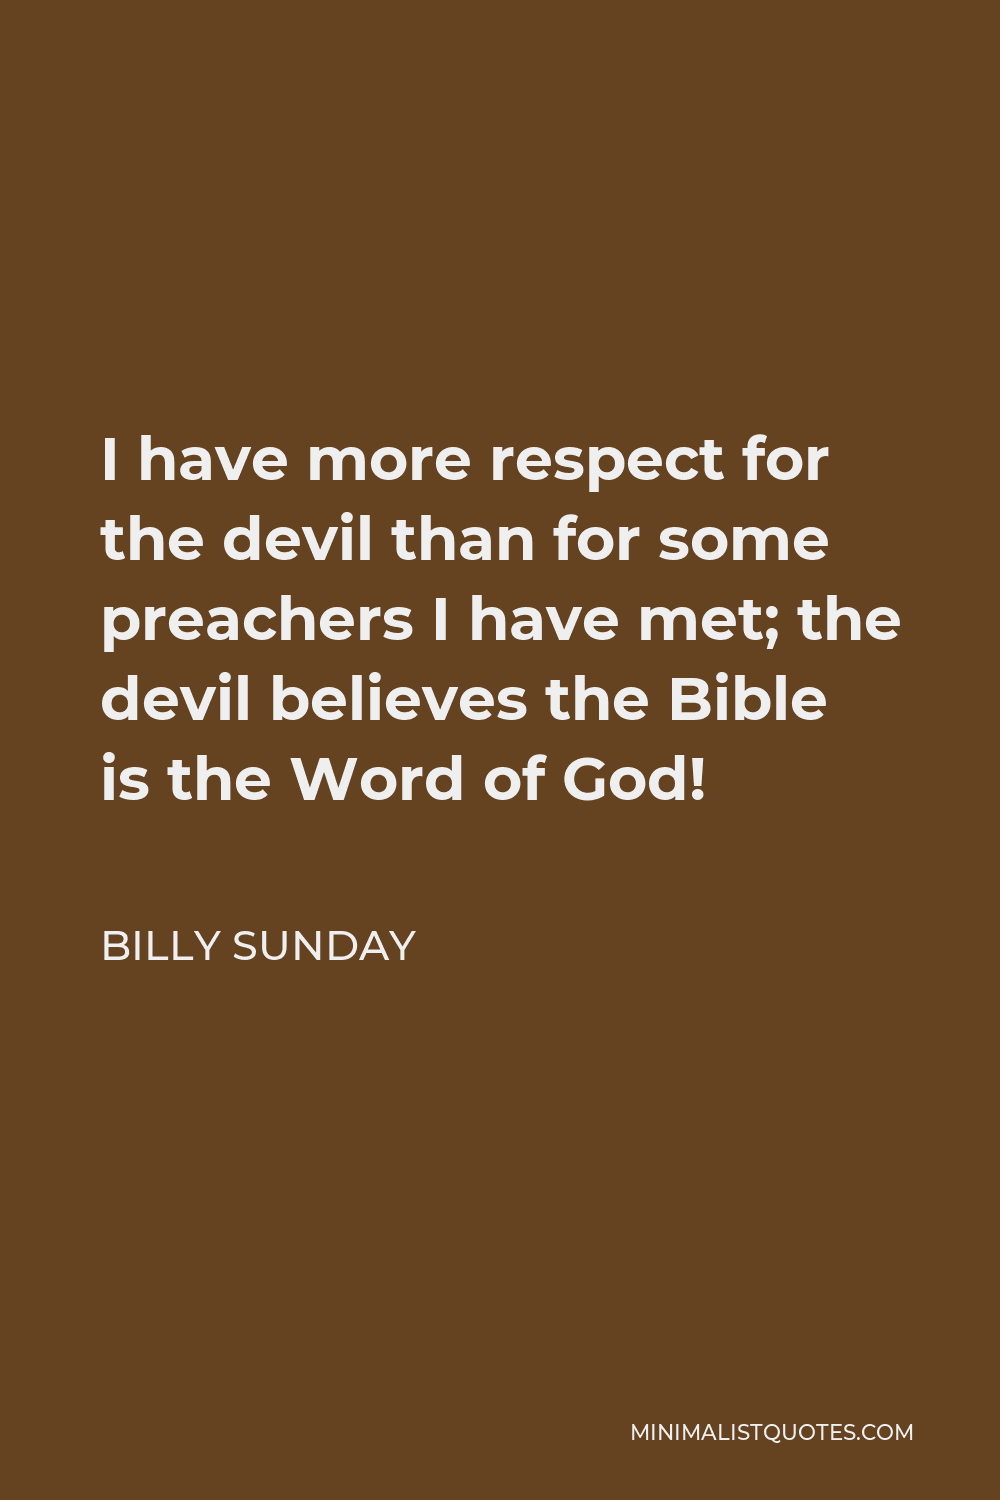 Billy Sunday Quote - I have more respect for the devil than for some preachers I have met; the devil believes the Bible is the Word of God!